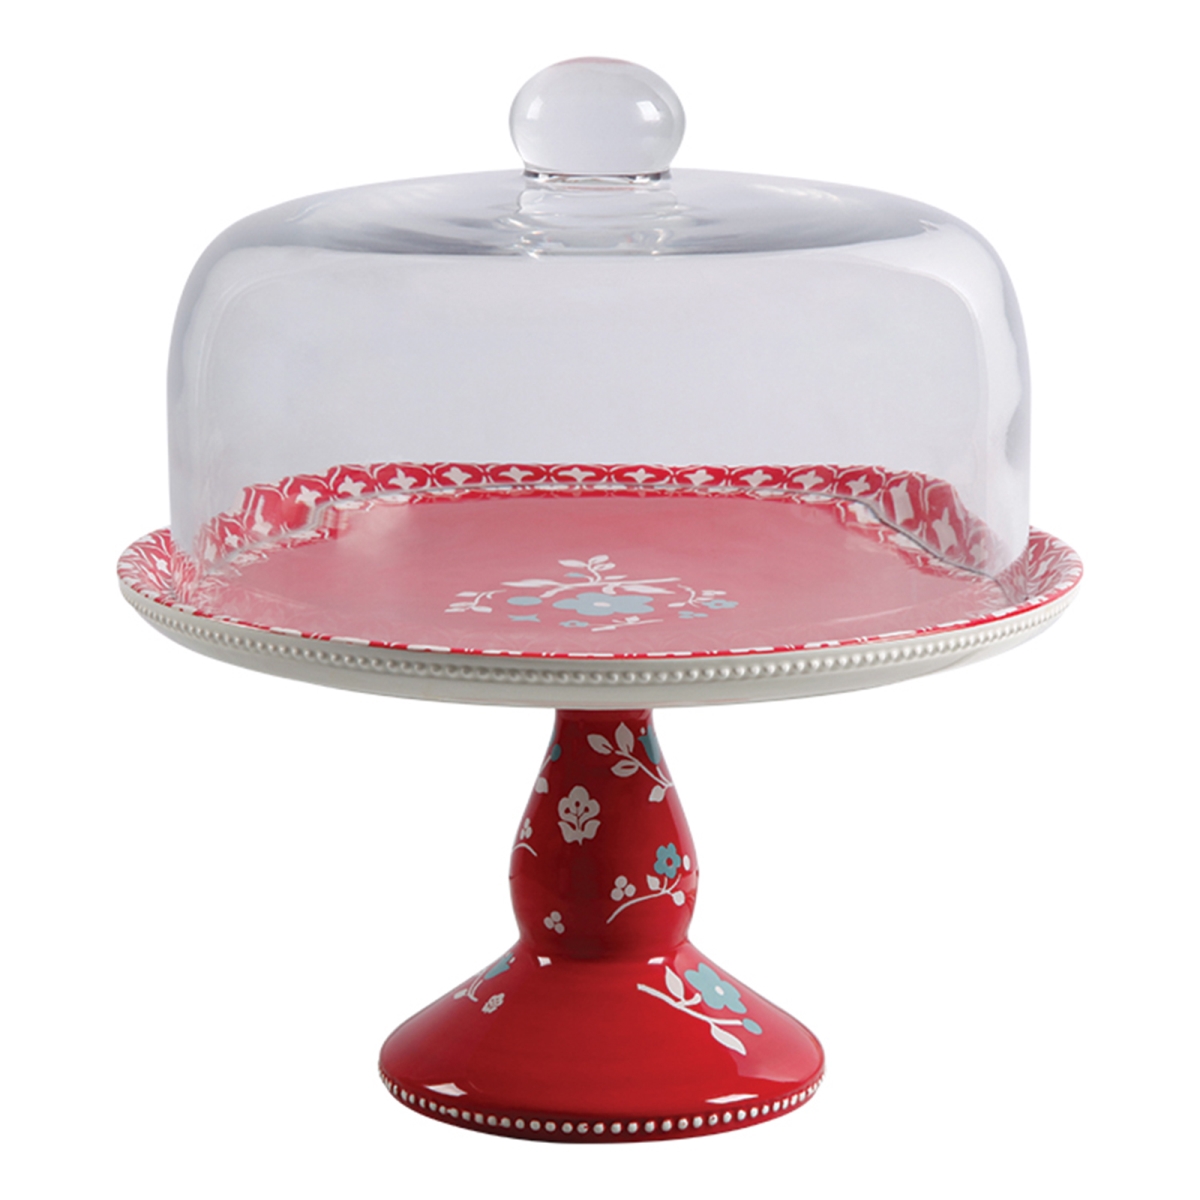 116801.02 10.25 In. Cherry Diner Hand Painted Durastone Cake Stand With Glass Dome